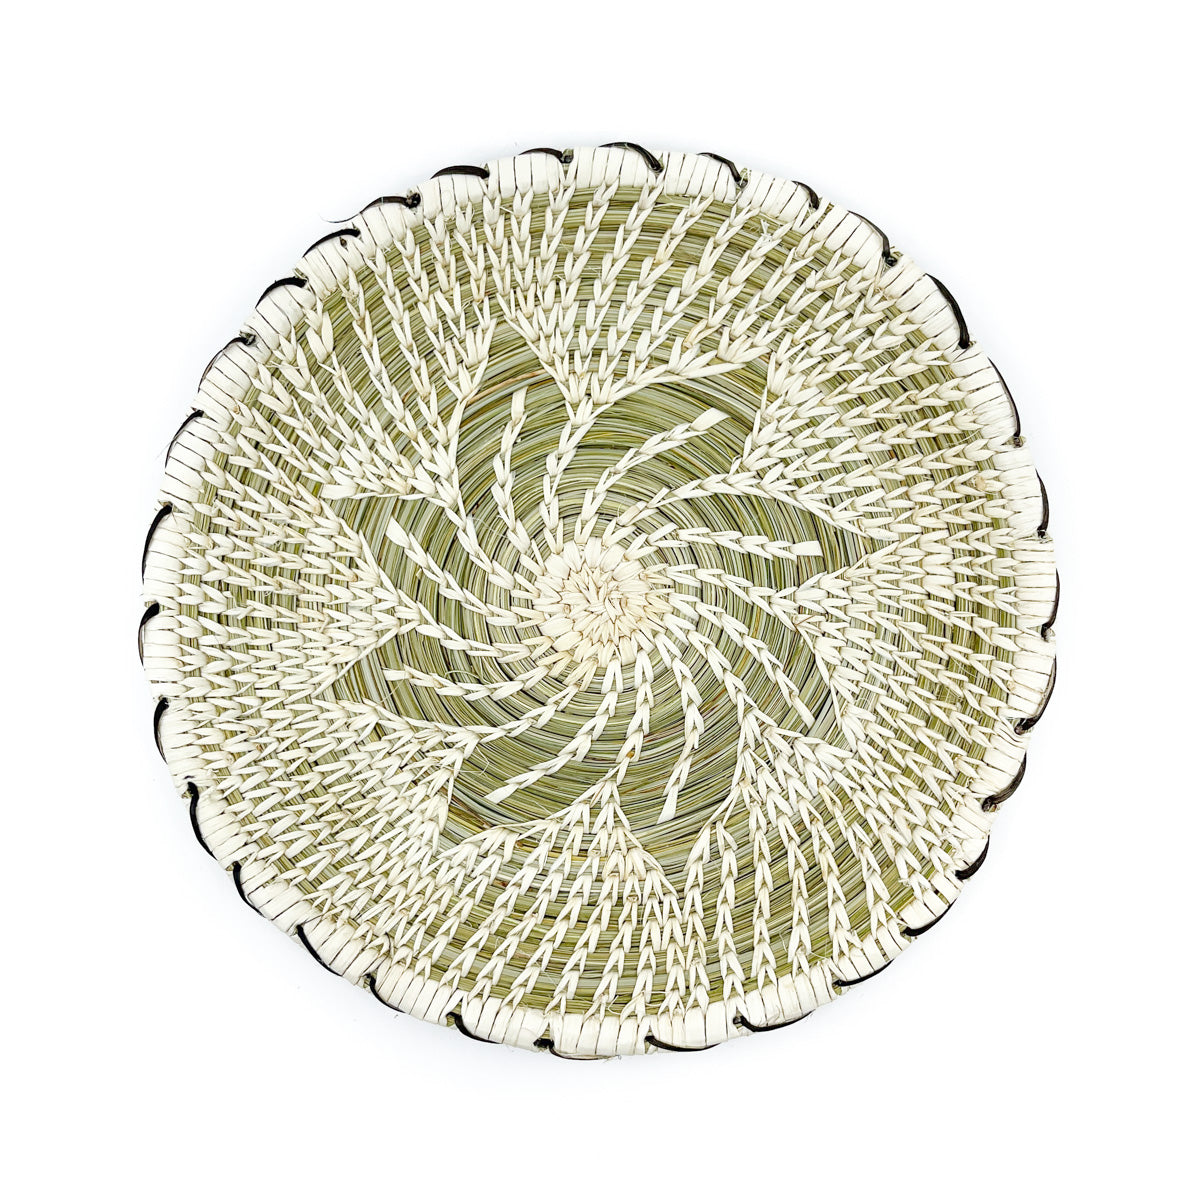 ﻿This handwoven round basket is by Margie Juan and measures approximately 10 inches in diameter.  Plant materials are hand gathered from the Sonoran Desert for basket weaving. The interior green coils (warp) are native Beargrass and the white stitches (weft) woven around the coils are sun-bleached Soaptree Yucca, the black stitching used for the basket edge is Devil's Claw Pod.  Keep away from sunlight to maintain color variations.